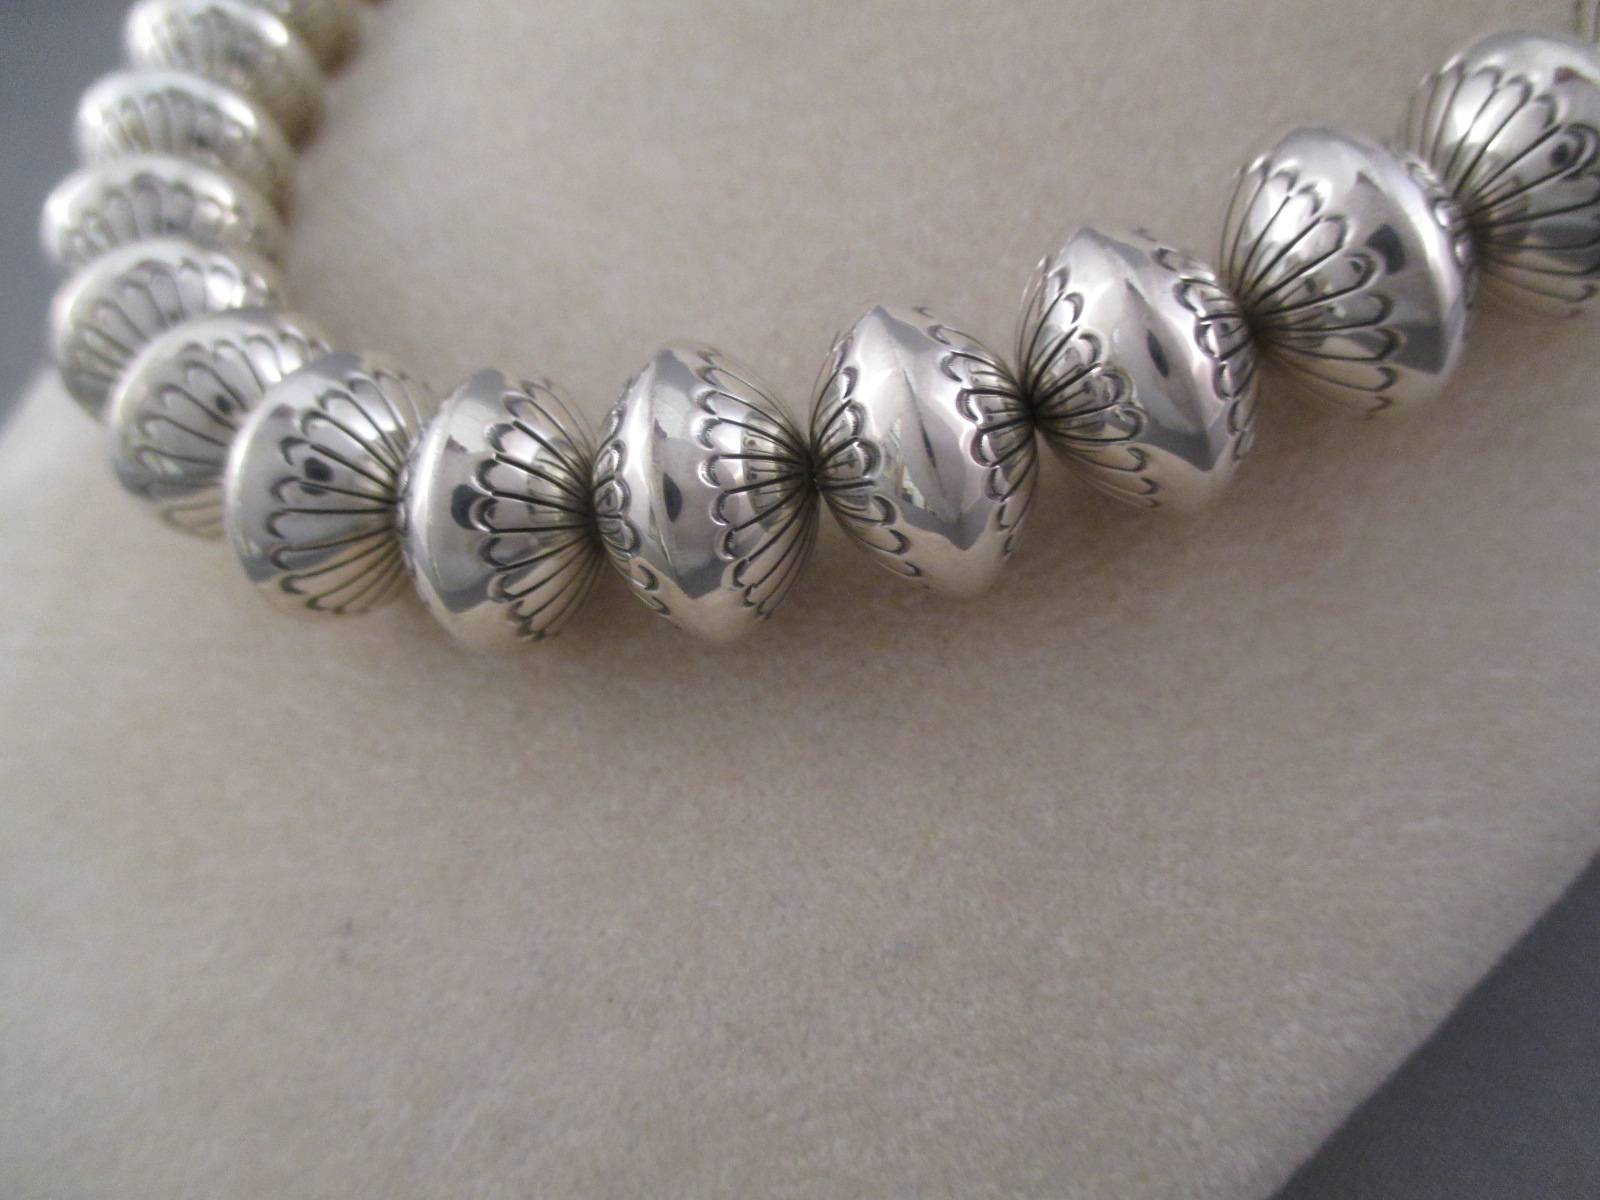 Marie Yazzie Stemped Sterling Silver Bead Necklace Jewelry